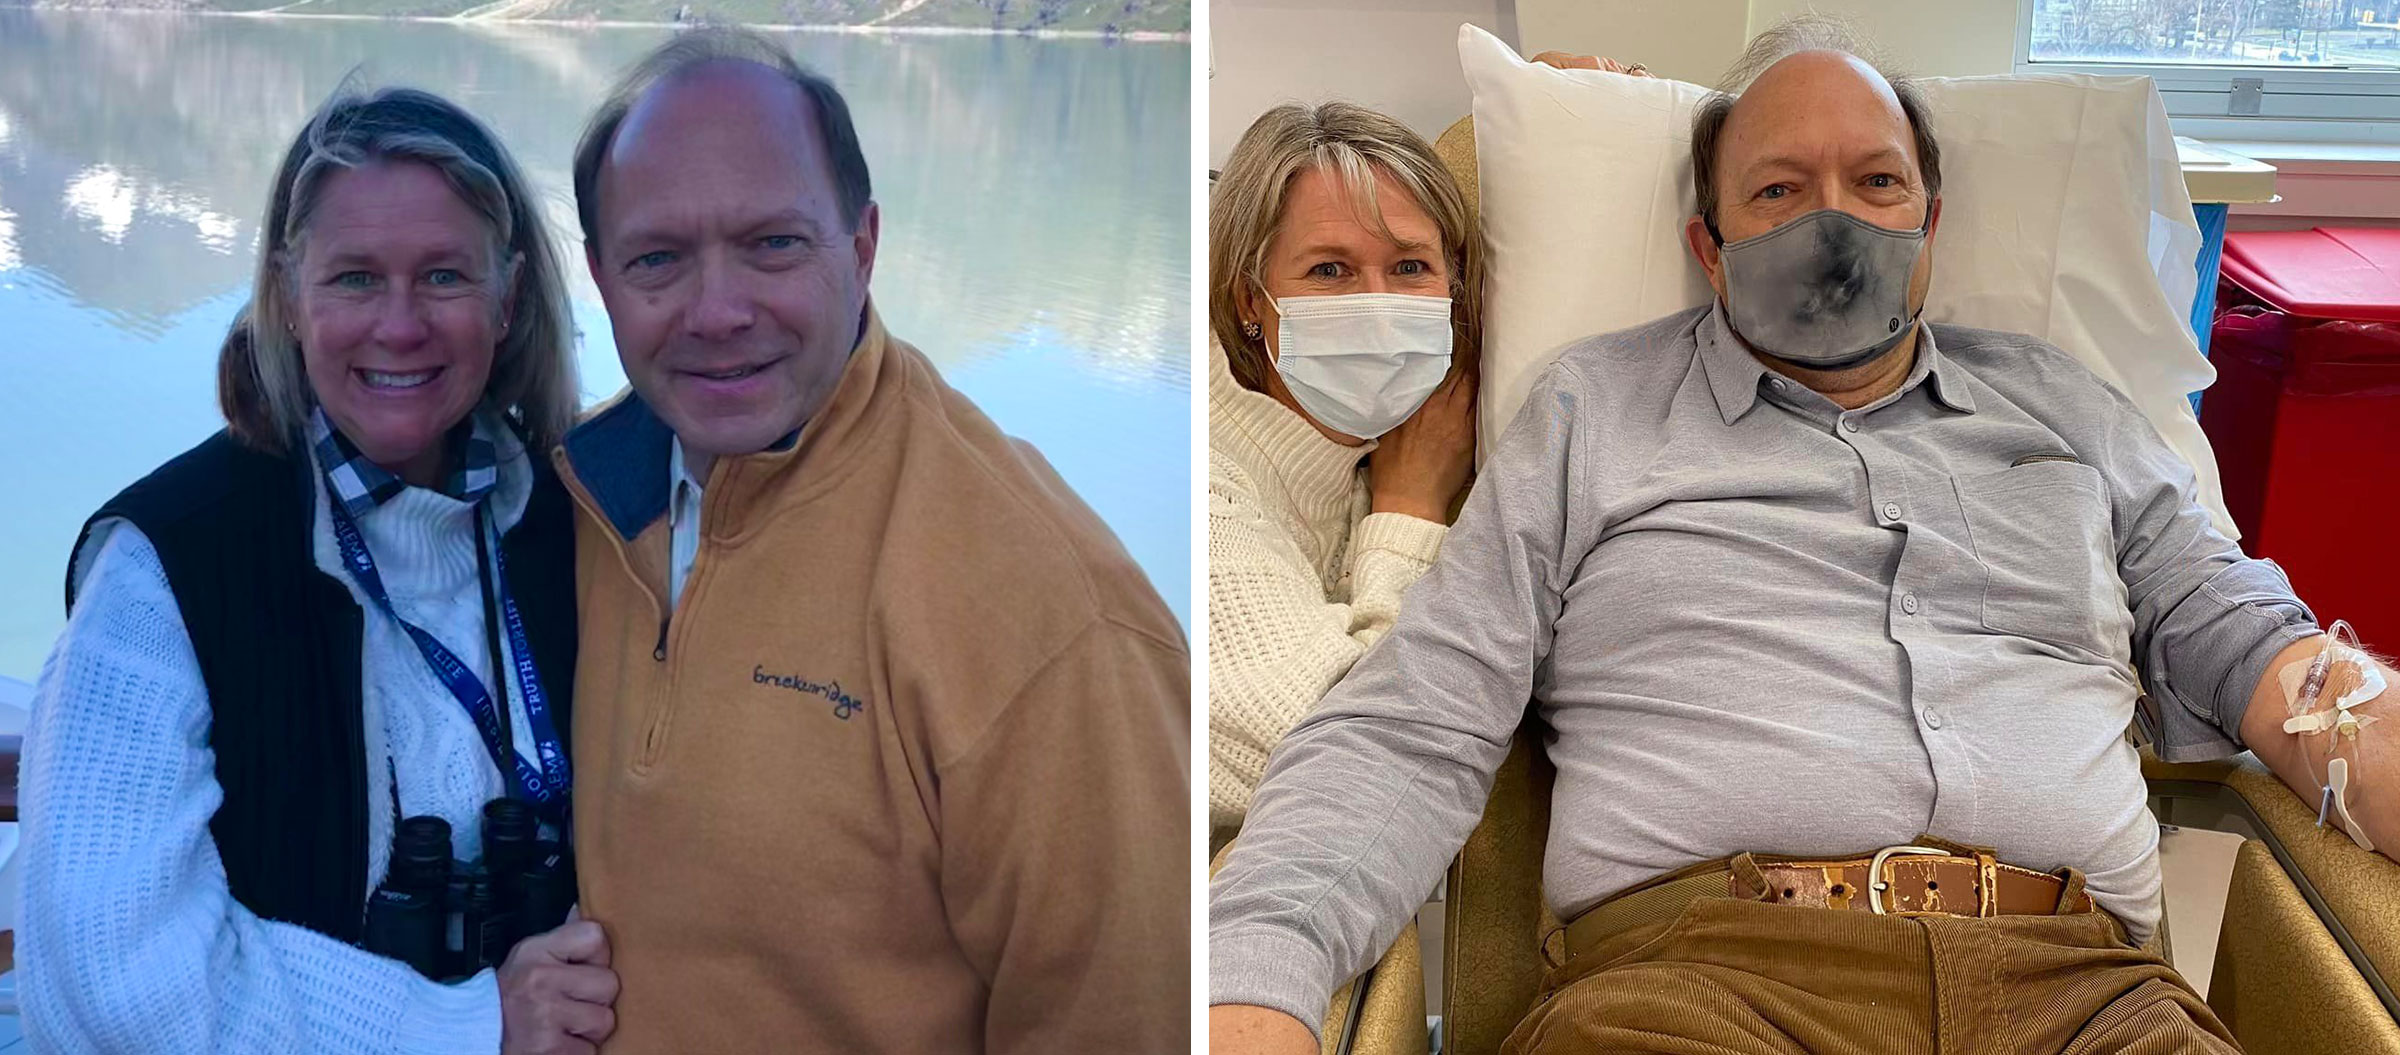 Ann and John Domecq go on a trip to Alaska in 2021, timed between injections while studying;  Ann and John during John's injections at the Cleveland Clinic in January 2023 (Domecq family)